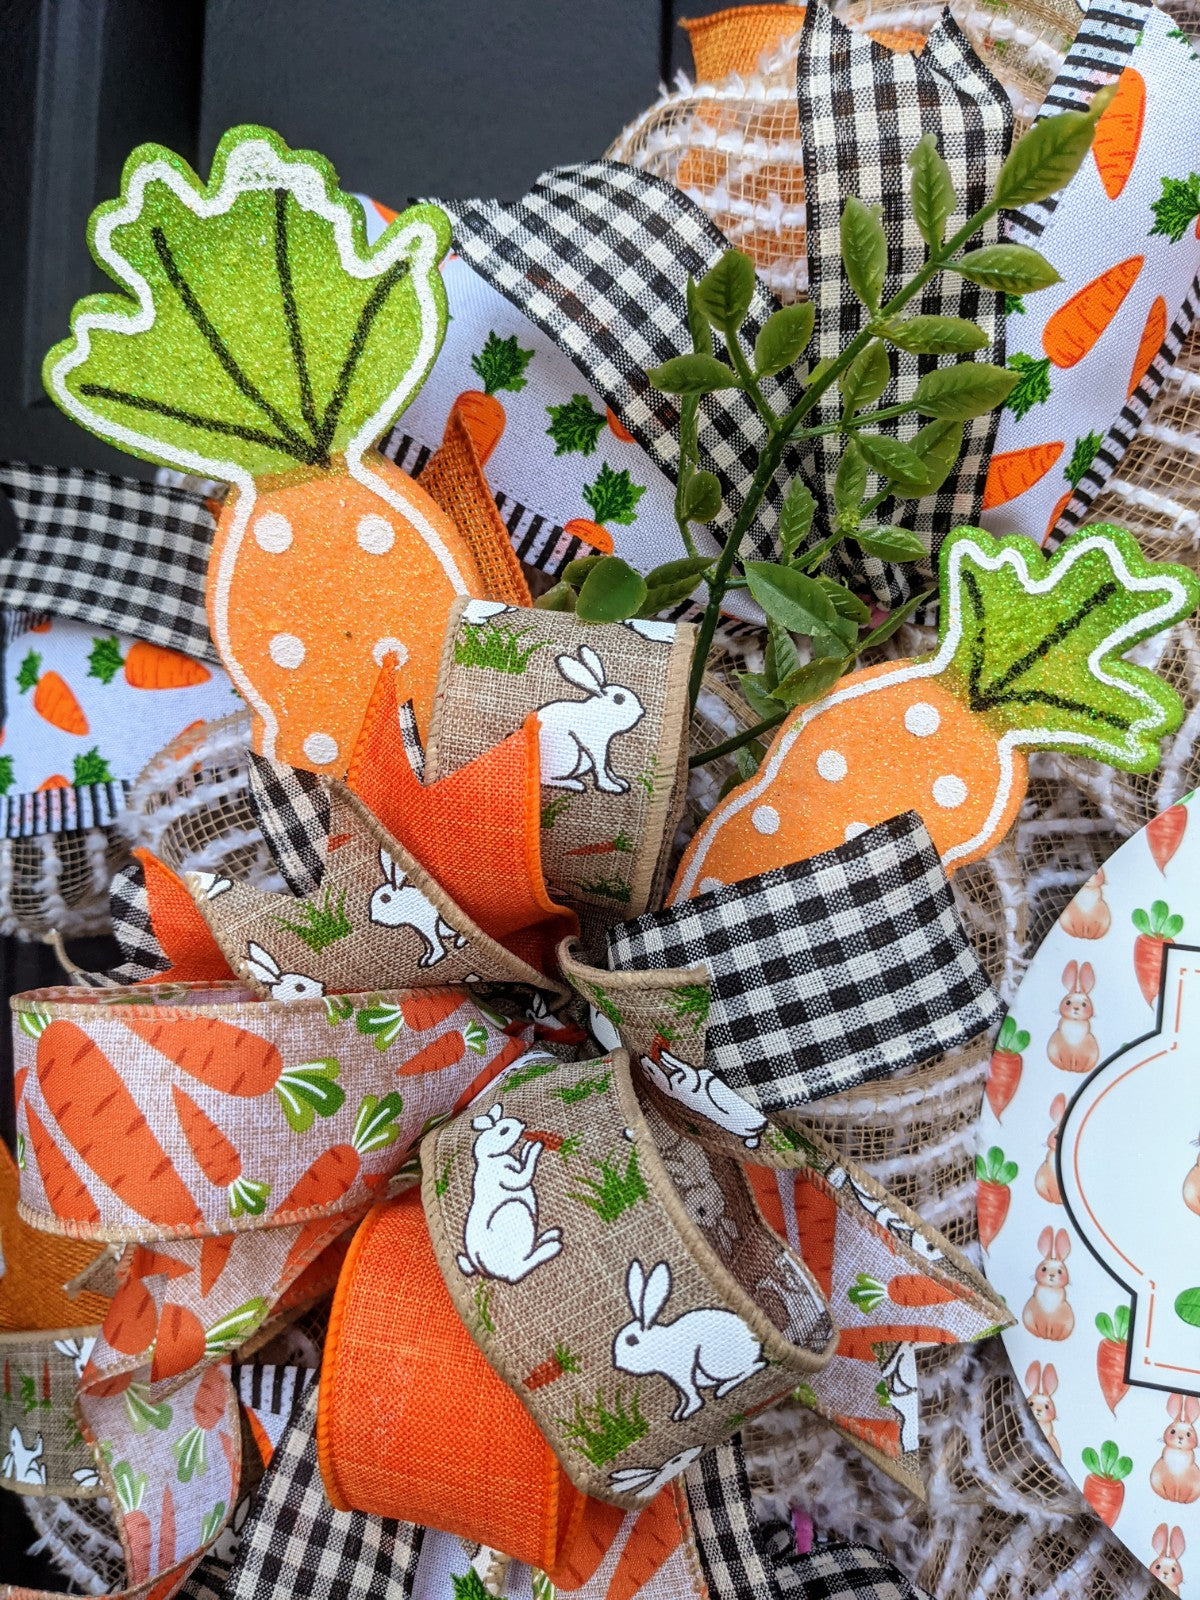 Easter Welcome Wreath, Easter Carrot Wreath, Easter Carrot Wreath, Easter Pancake Wreath, Happy Easter Wreath